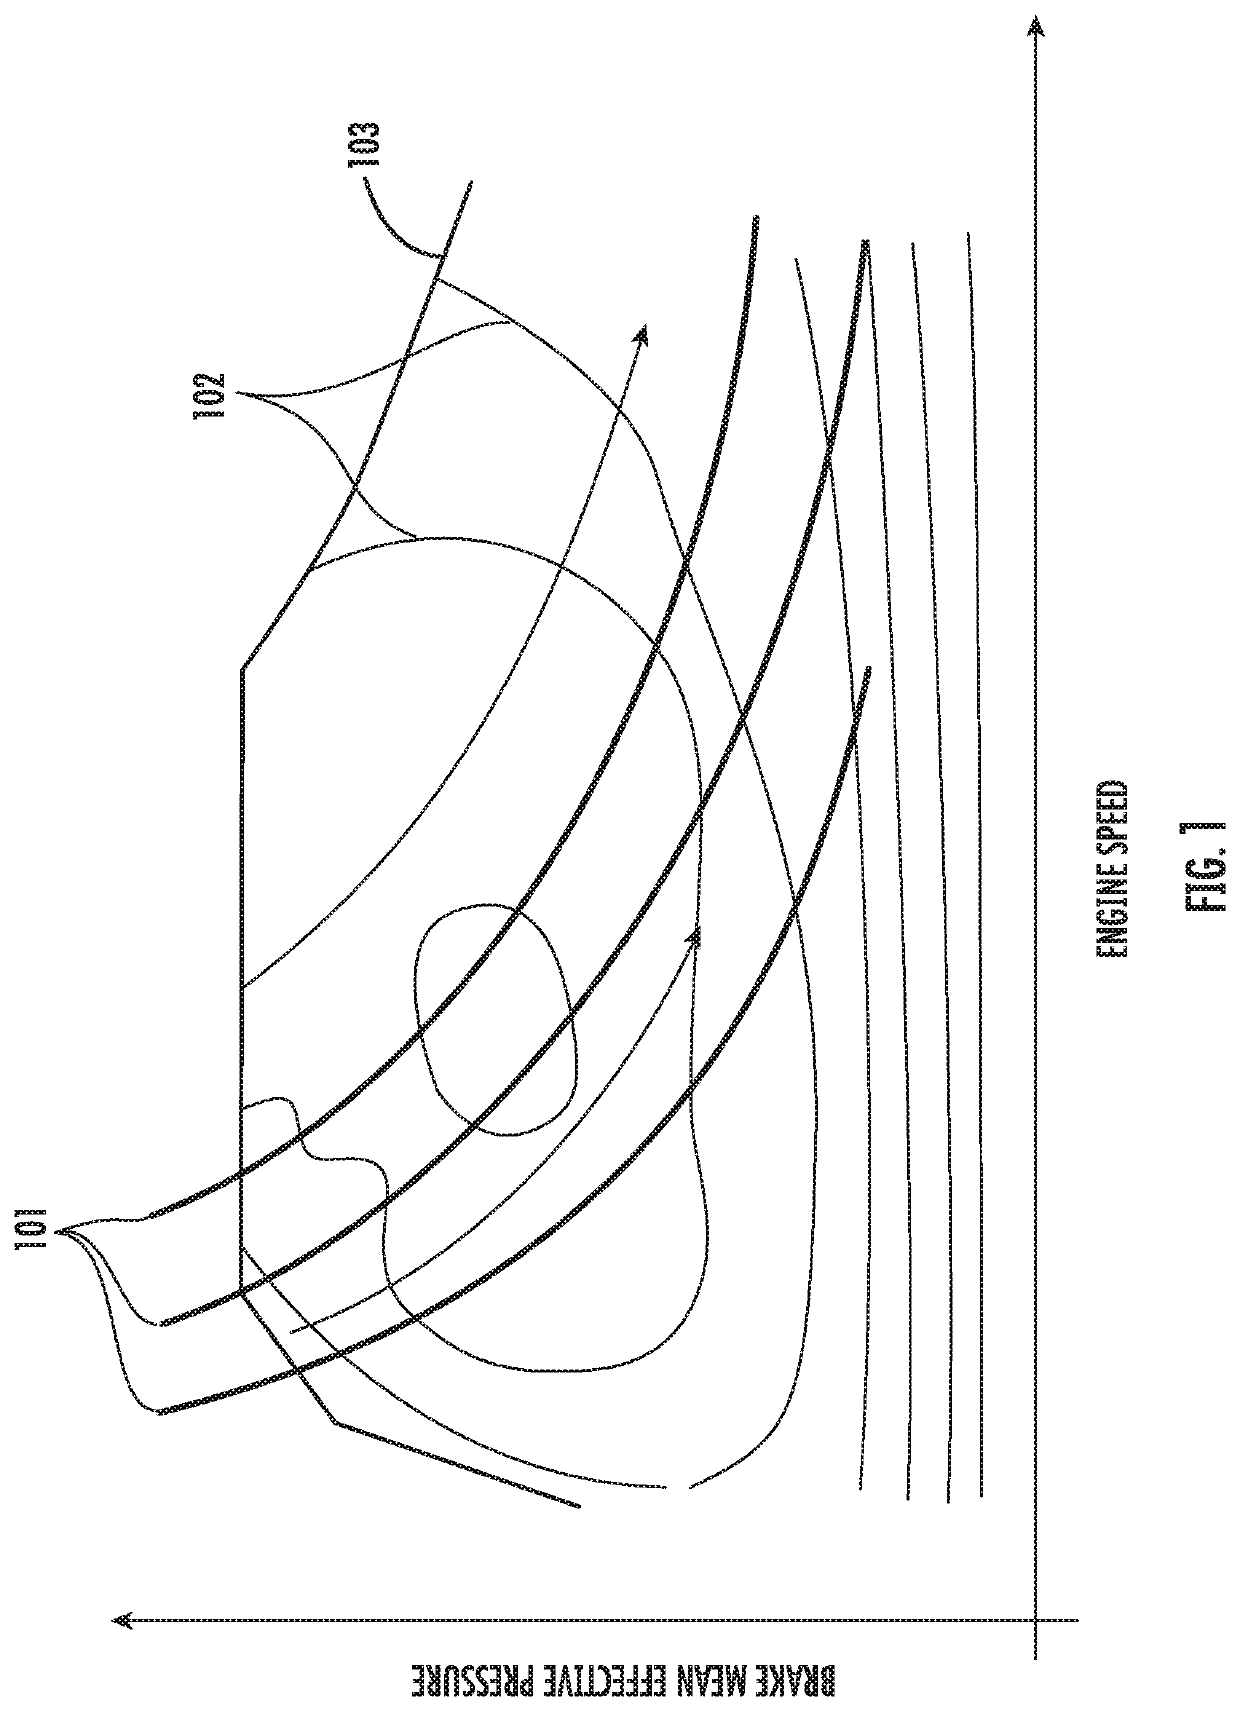 Upspeeded Operation Of Alcohol-Enabled Gasoline Engines